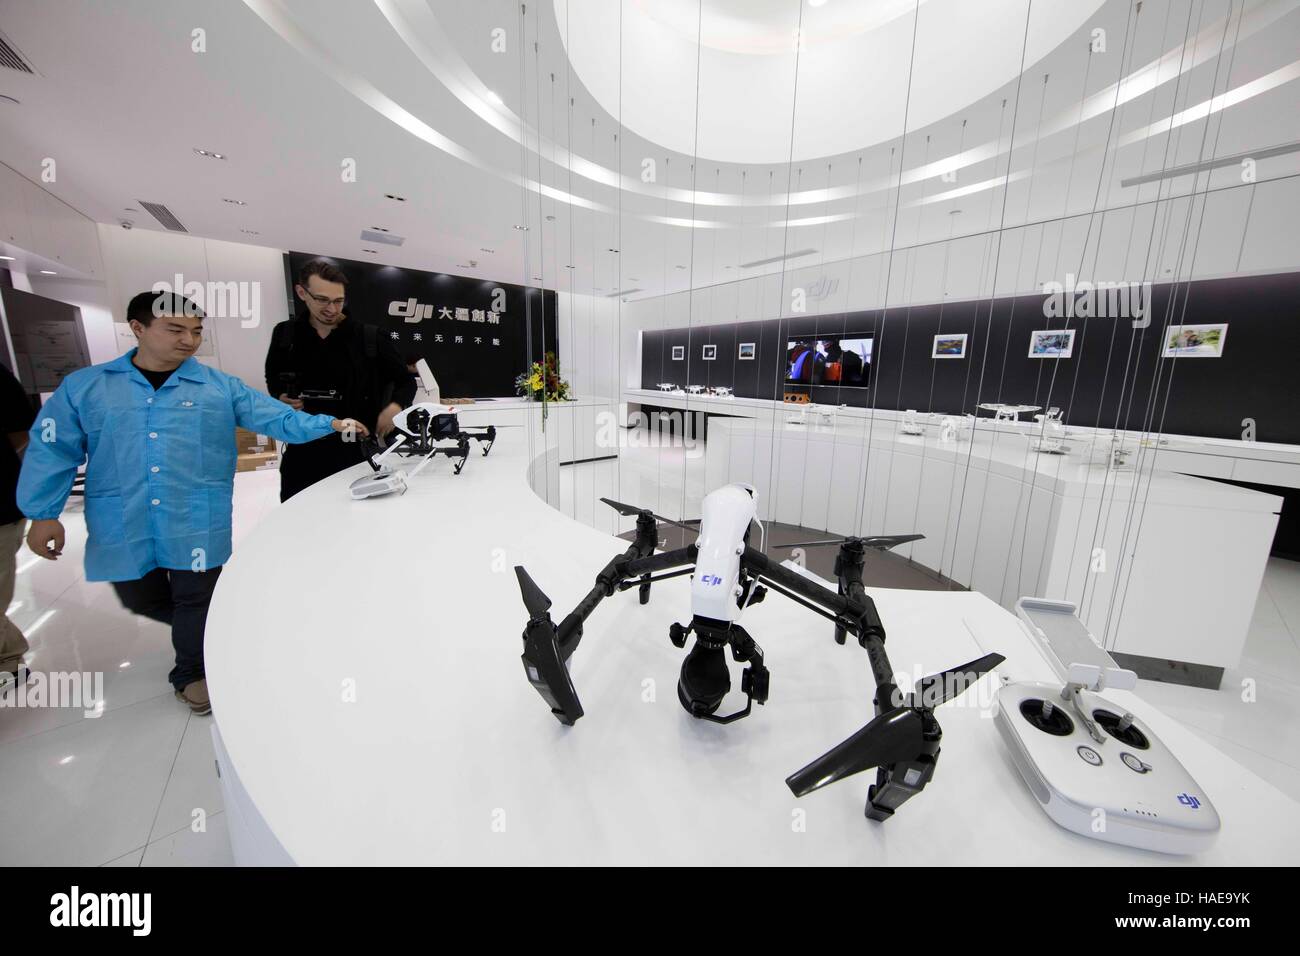 Drone Store in Shenzhen (China - Alamy